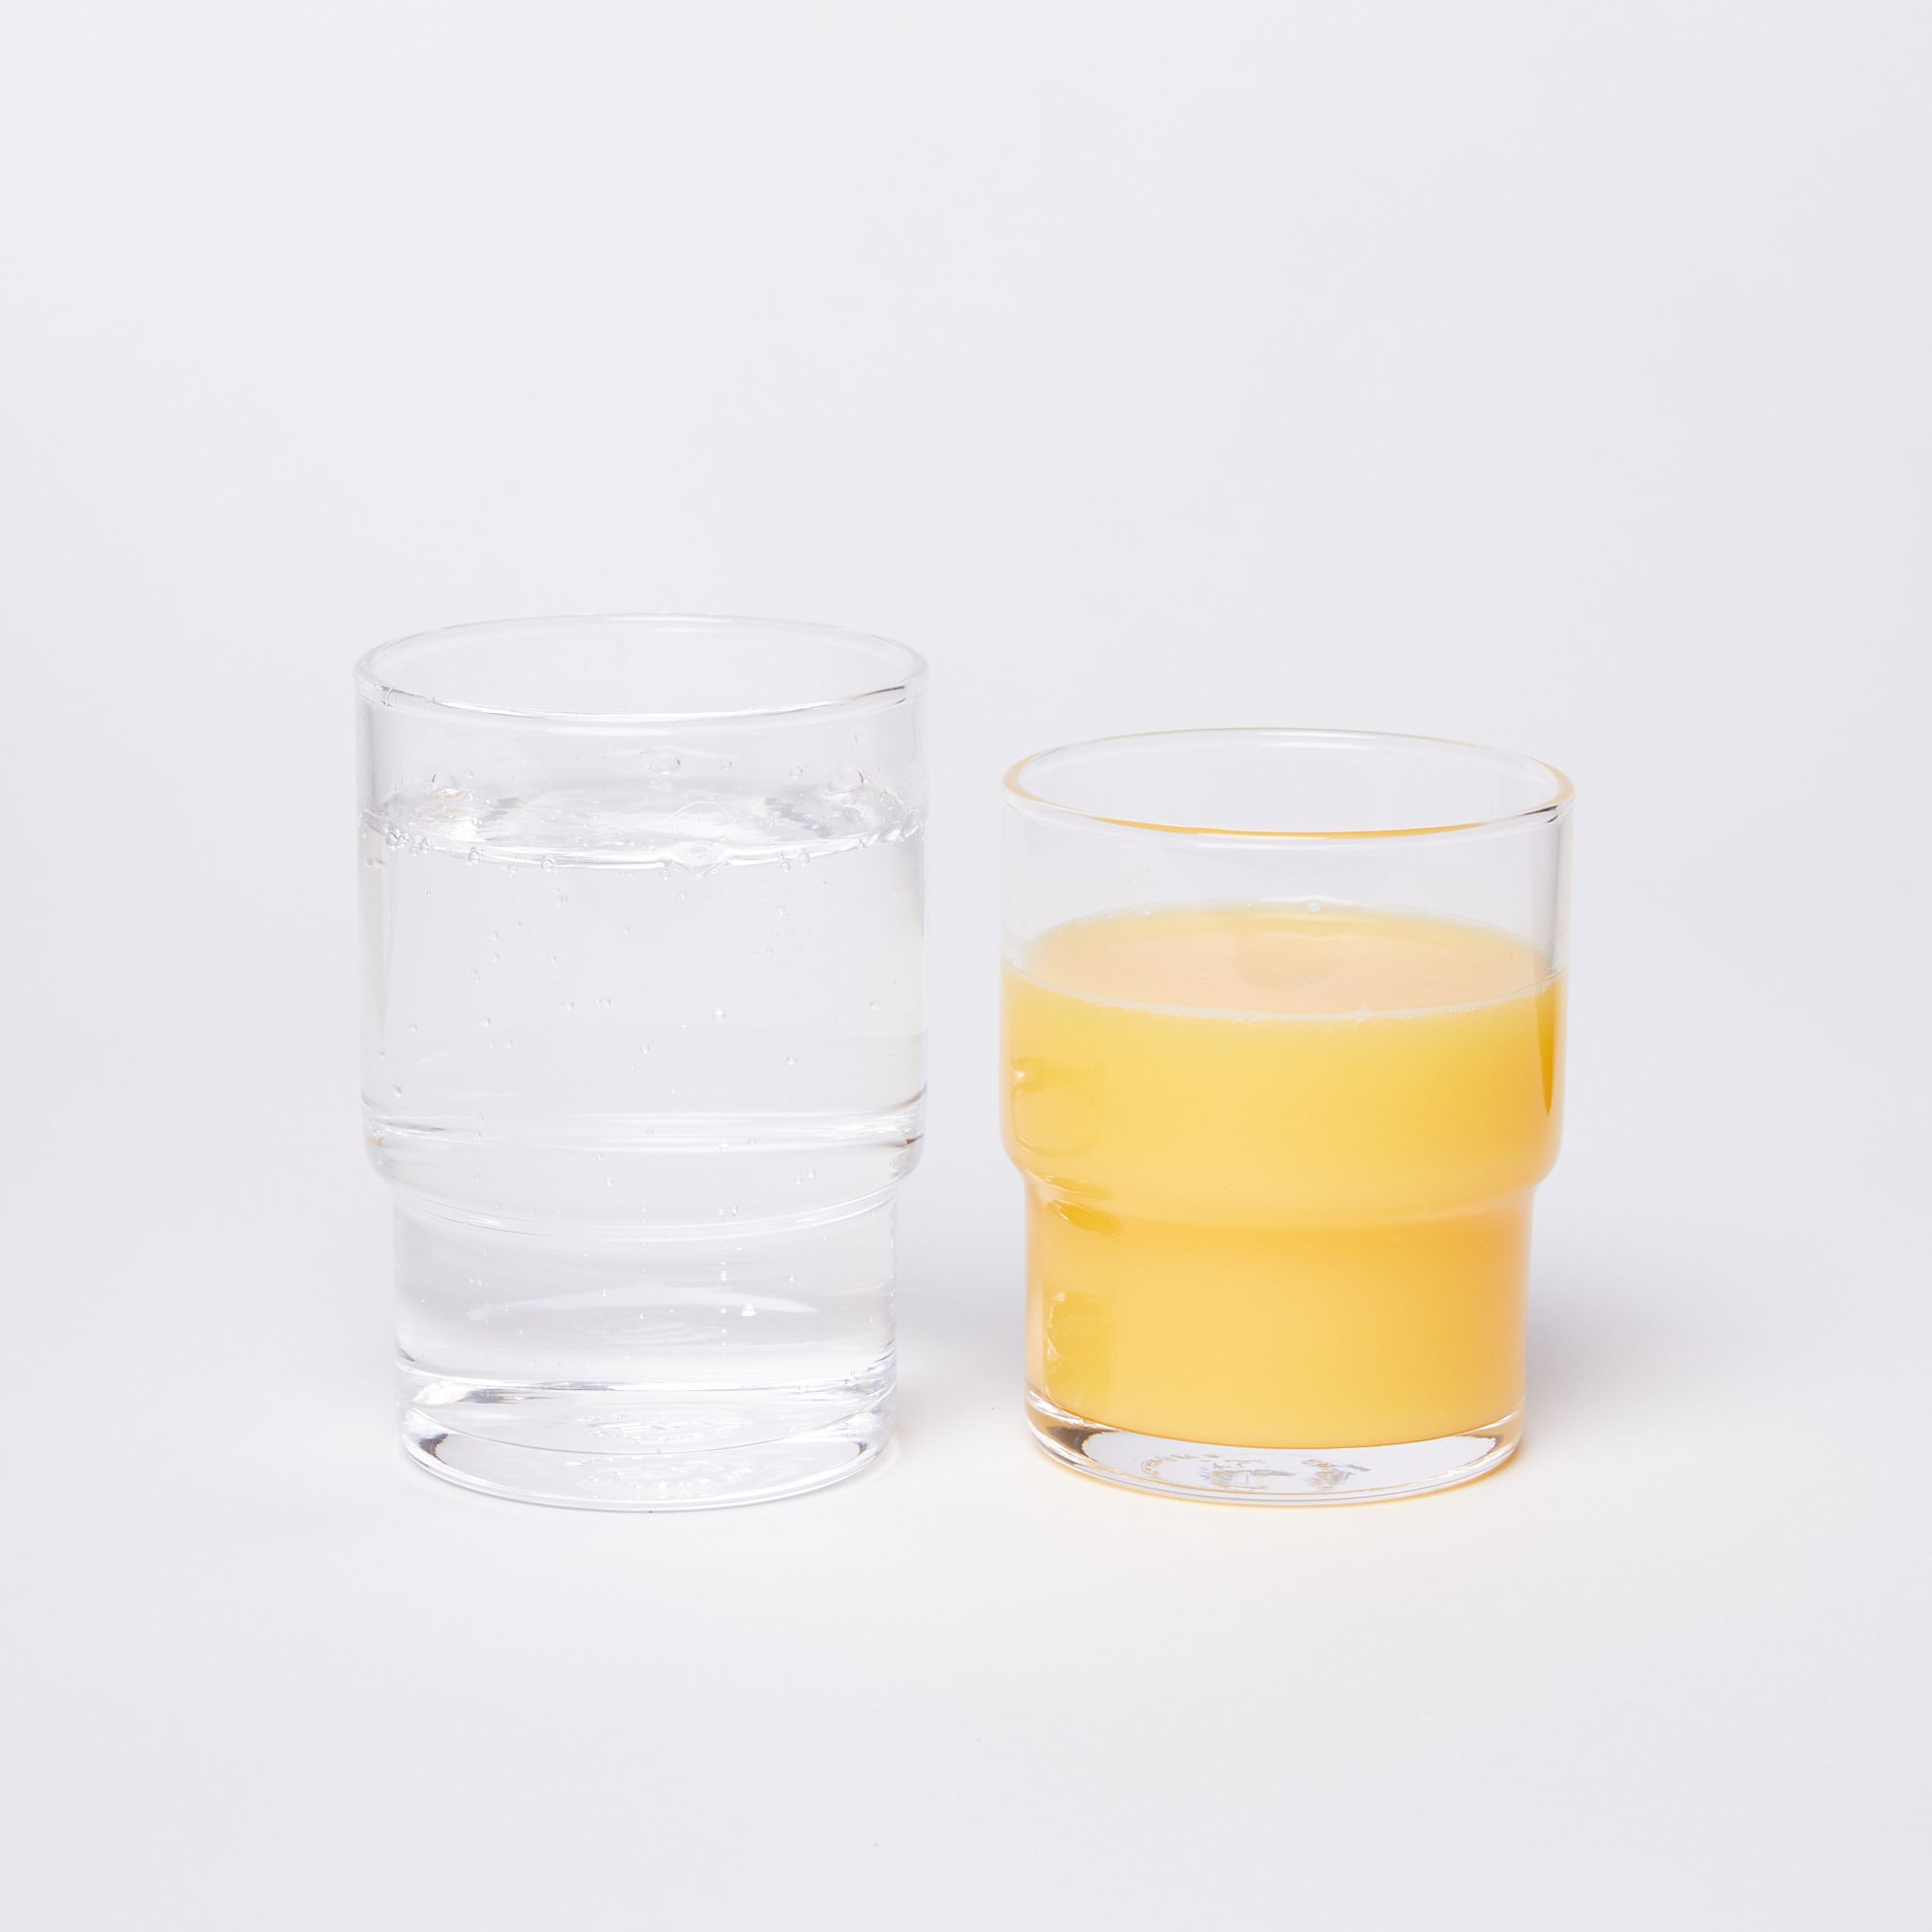 A taller glass full of water on the left next to a shorter glass full of orange juice on the right